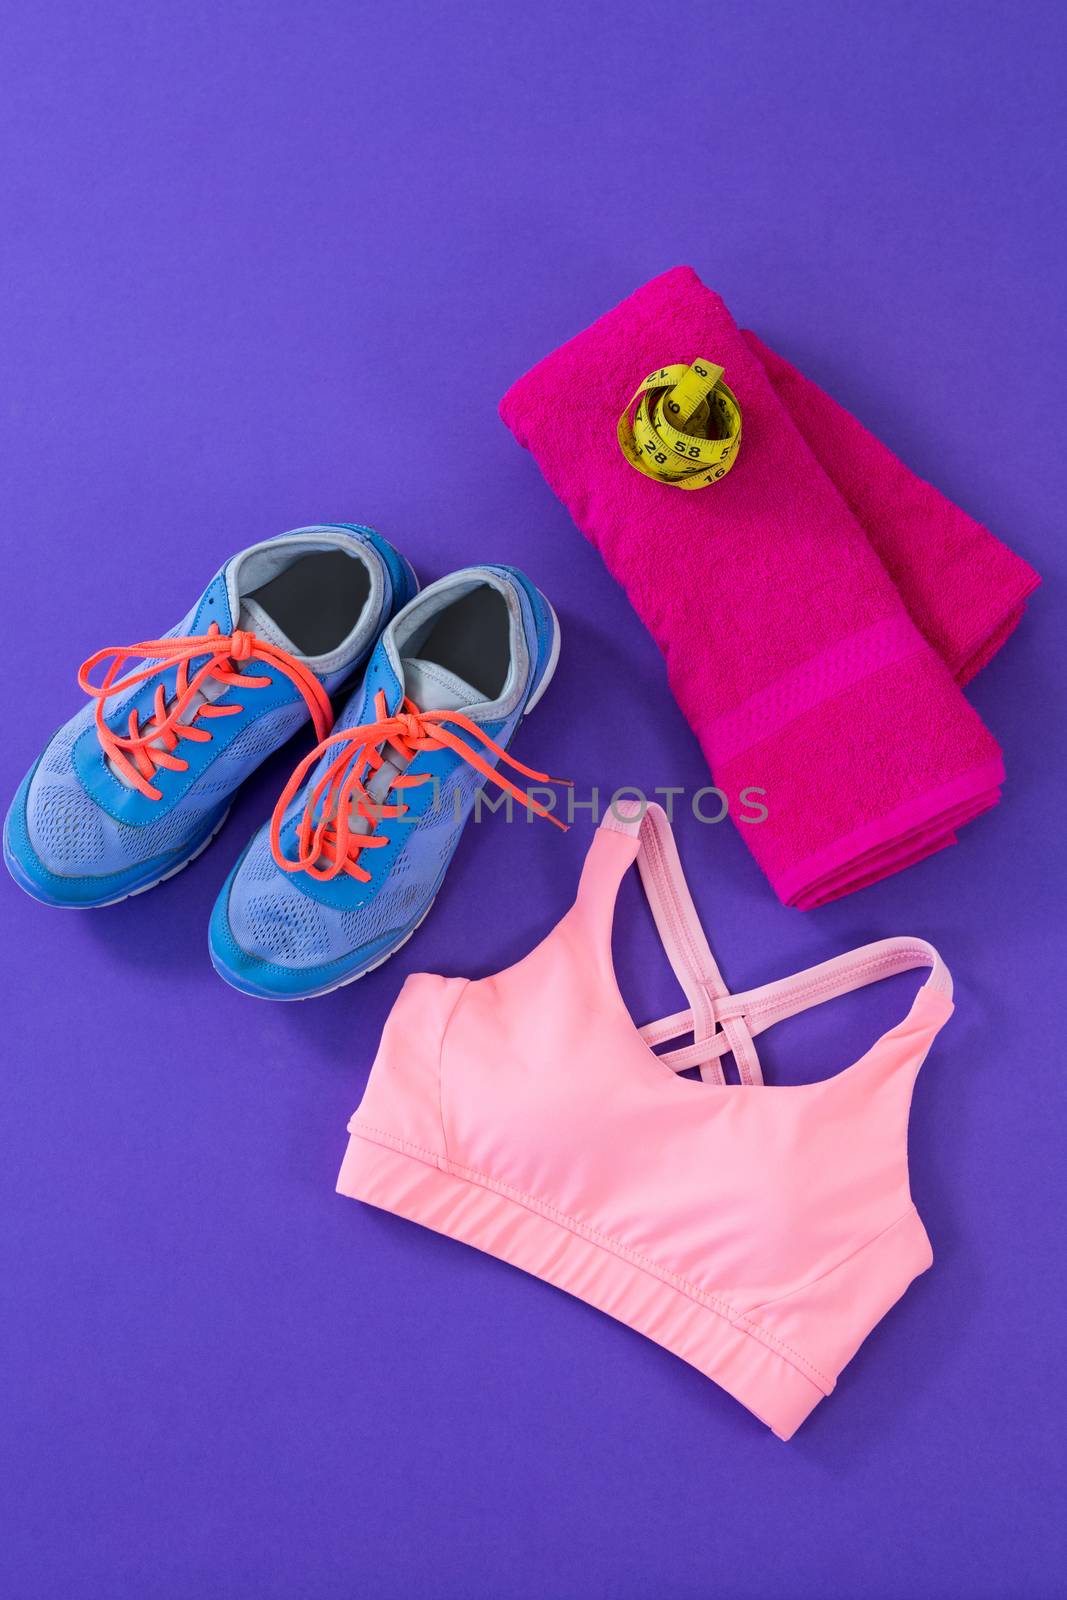 Sneakers, sports bra, towel and measuring tape on purple background